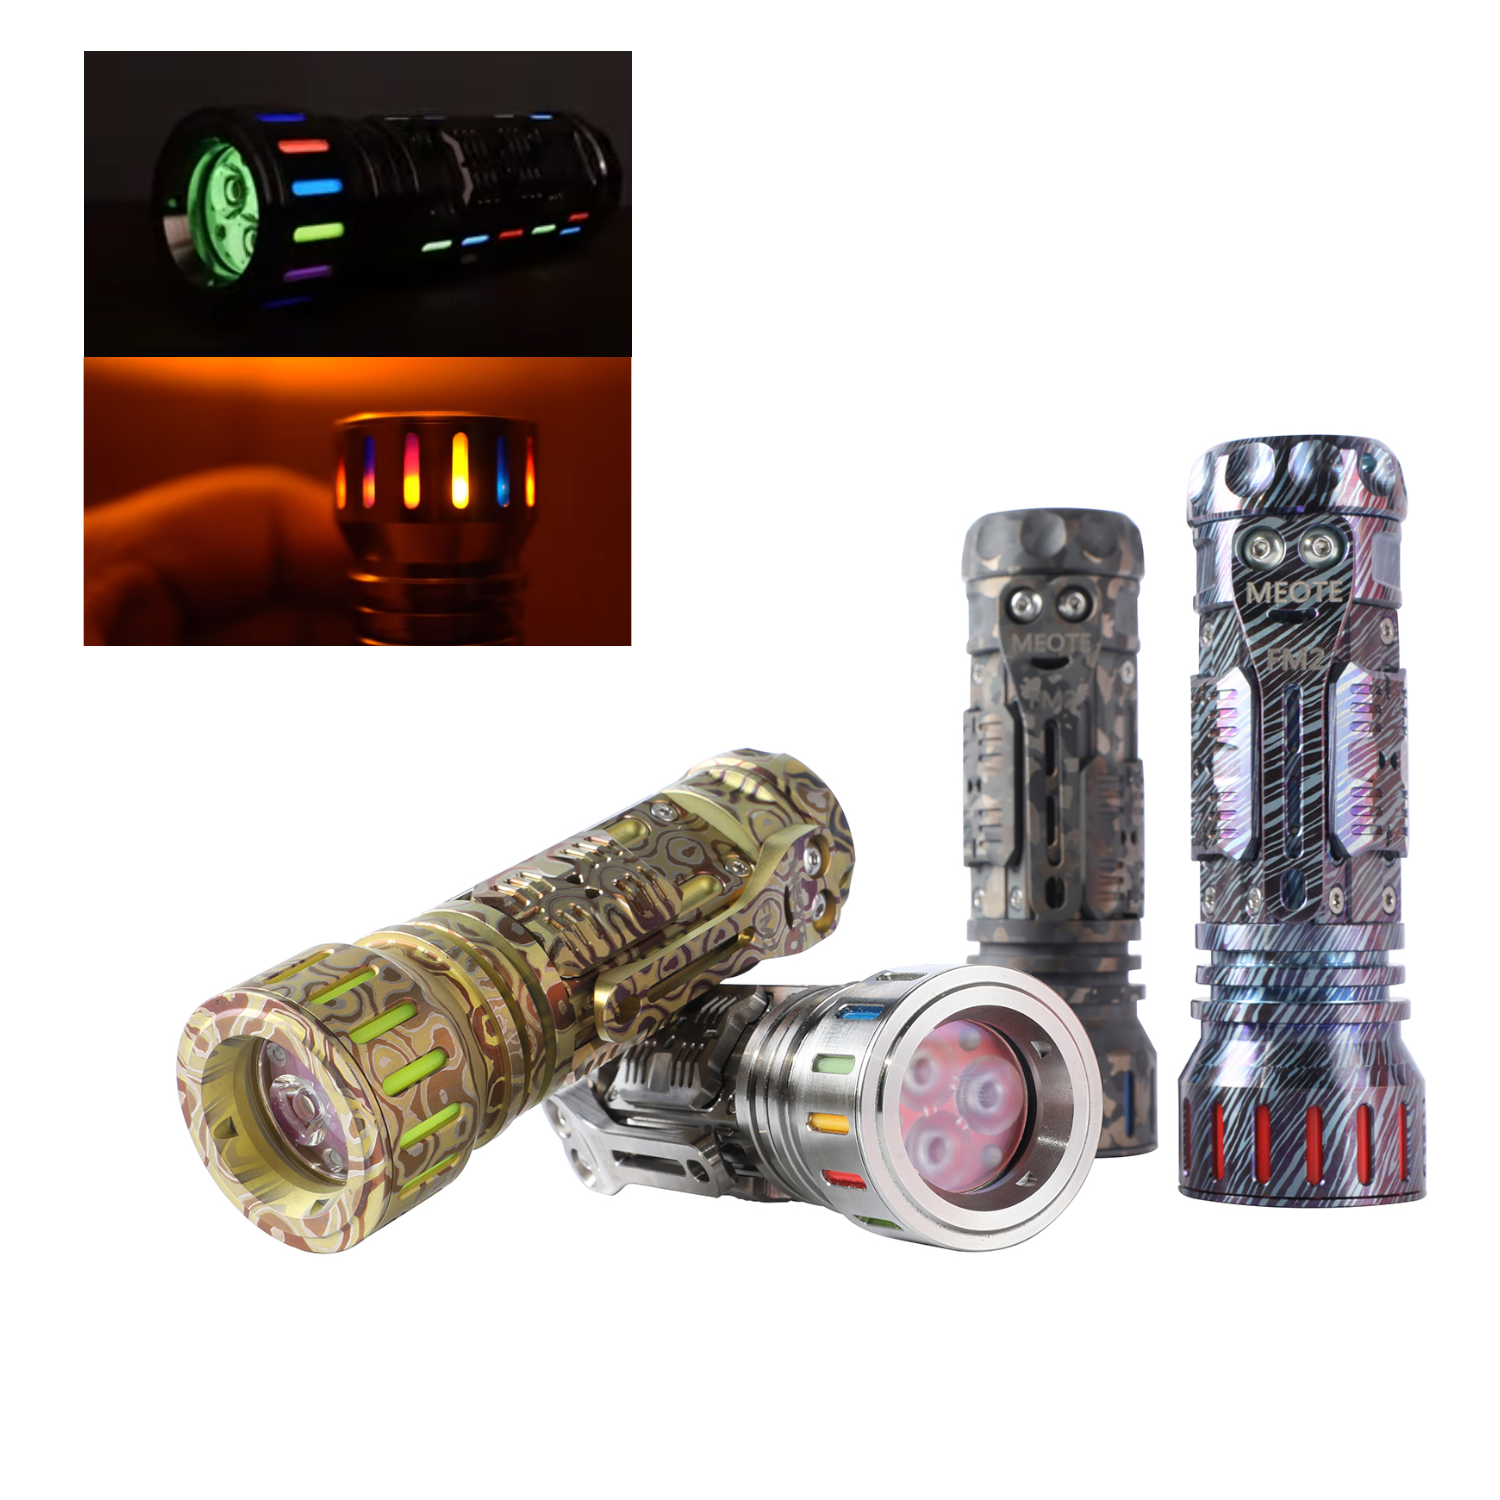 MEOTE FM2 SFS80 2360lm 225m EDC Titanium Flashlight with New UI 14500 Battery Mini LED Torch Tactical Survival Tools EDC Collections For Outdoor Camping Hunting Fishing